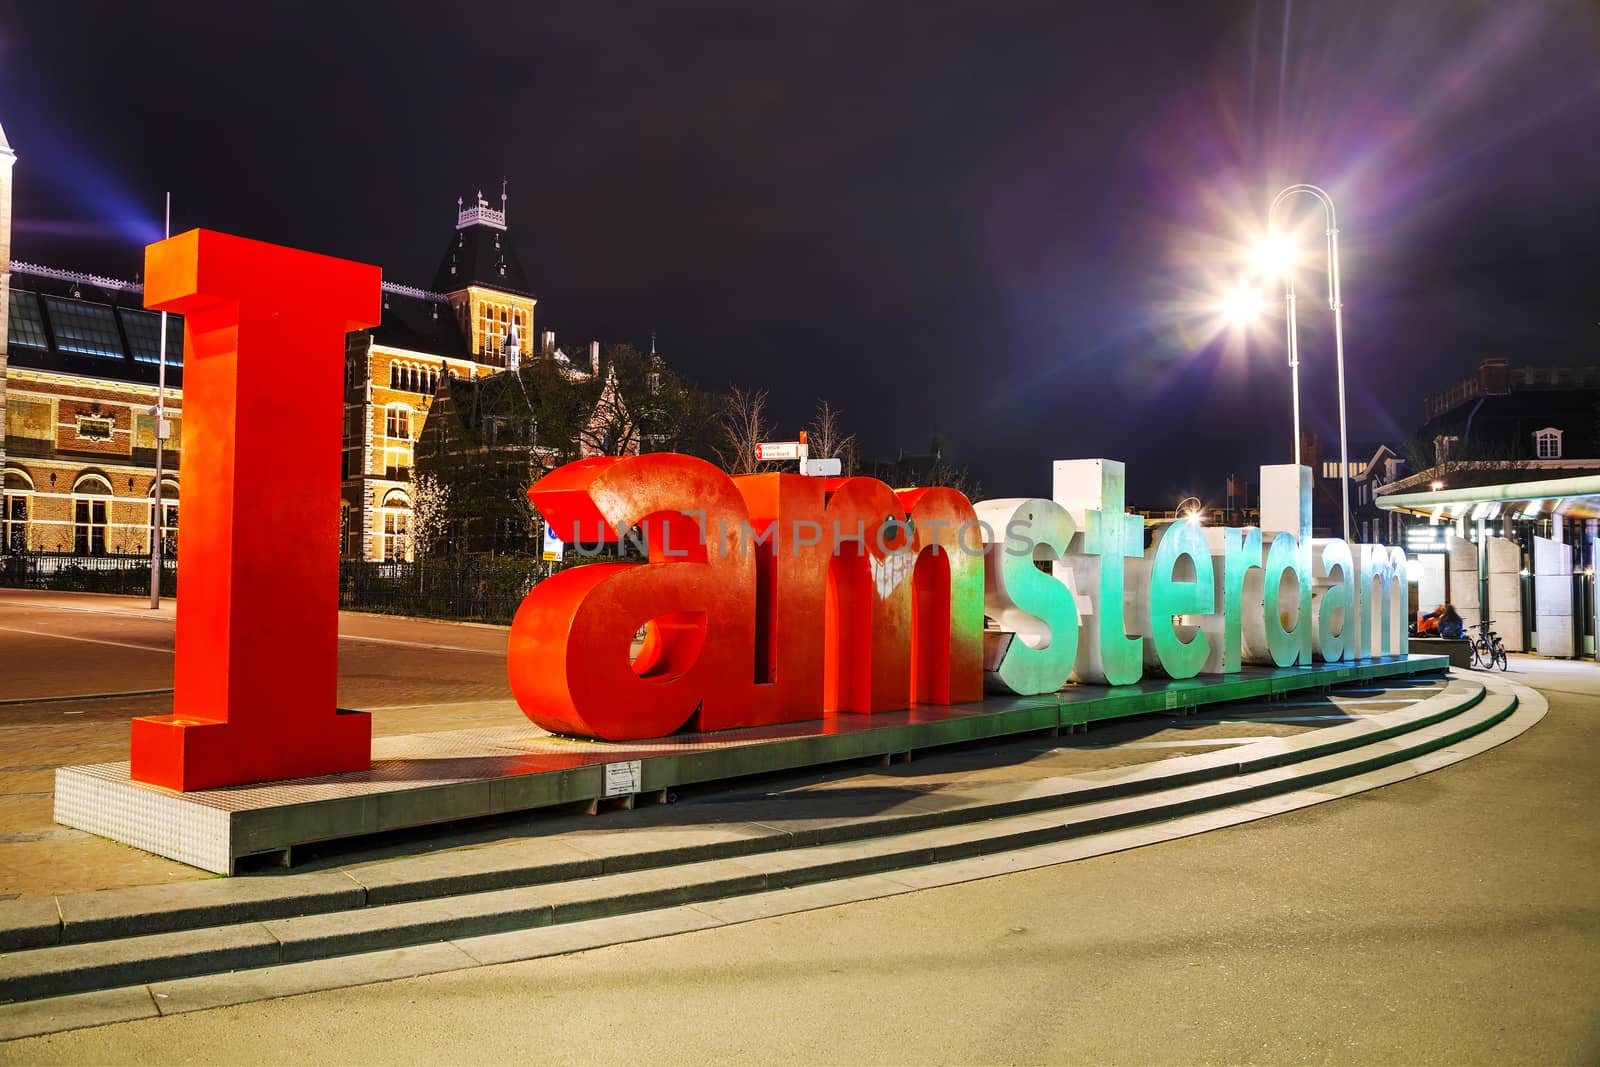 I Amsterdam slogan early in the evening by AndreyKr